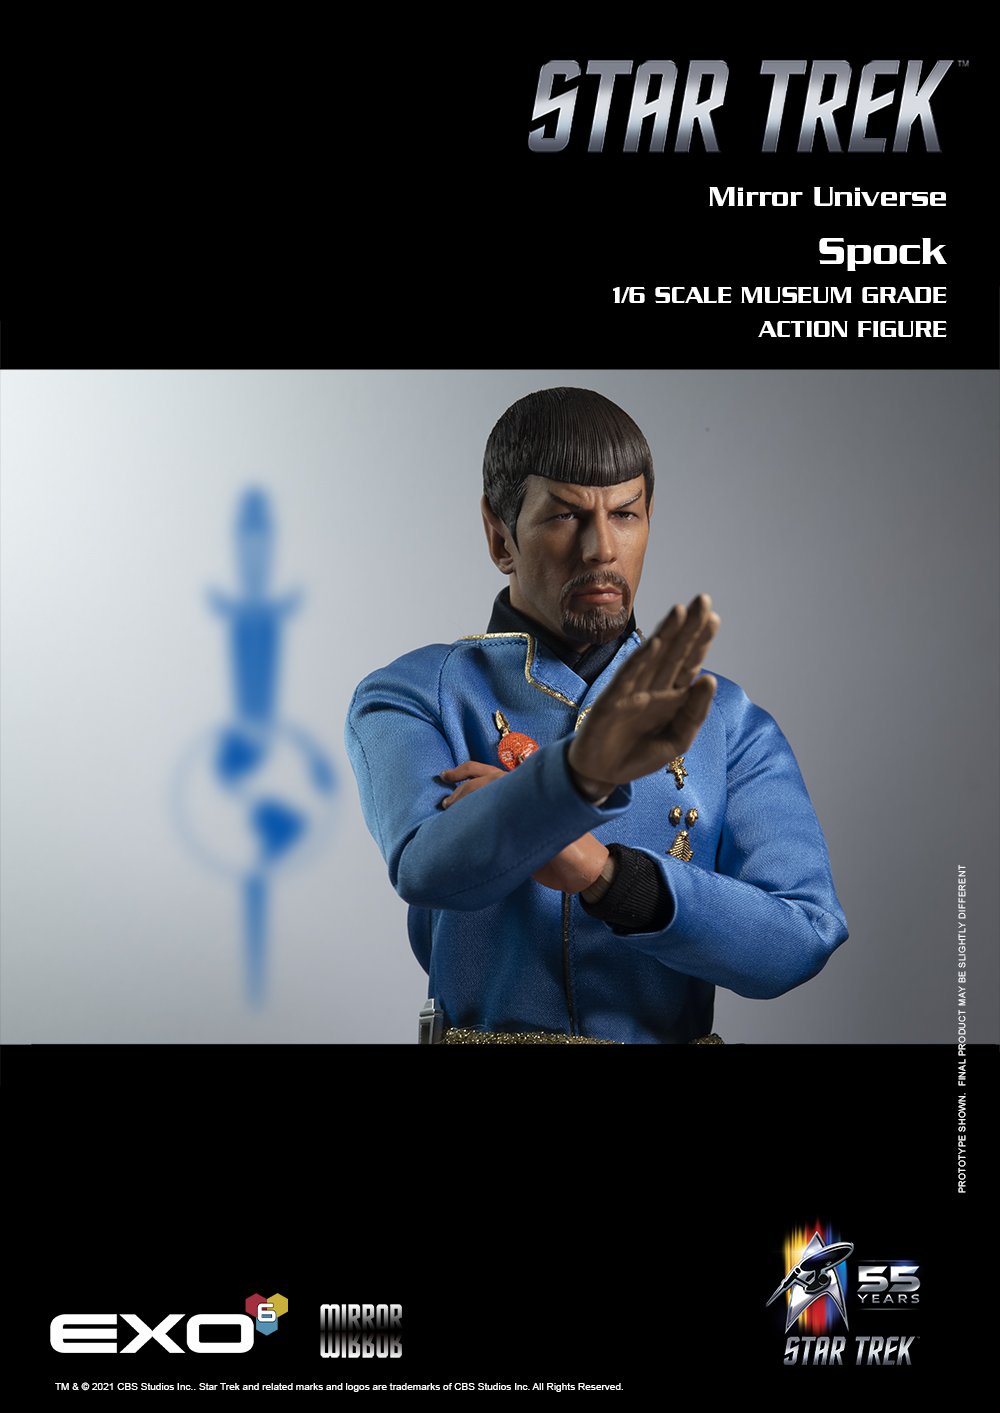 Spock - NEW PRODUCT: Exo-6: Star Trek: The Original Series  SPOCK – MIRROR UNIVERSE 1/6 action figure 240f9310